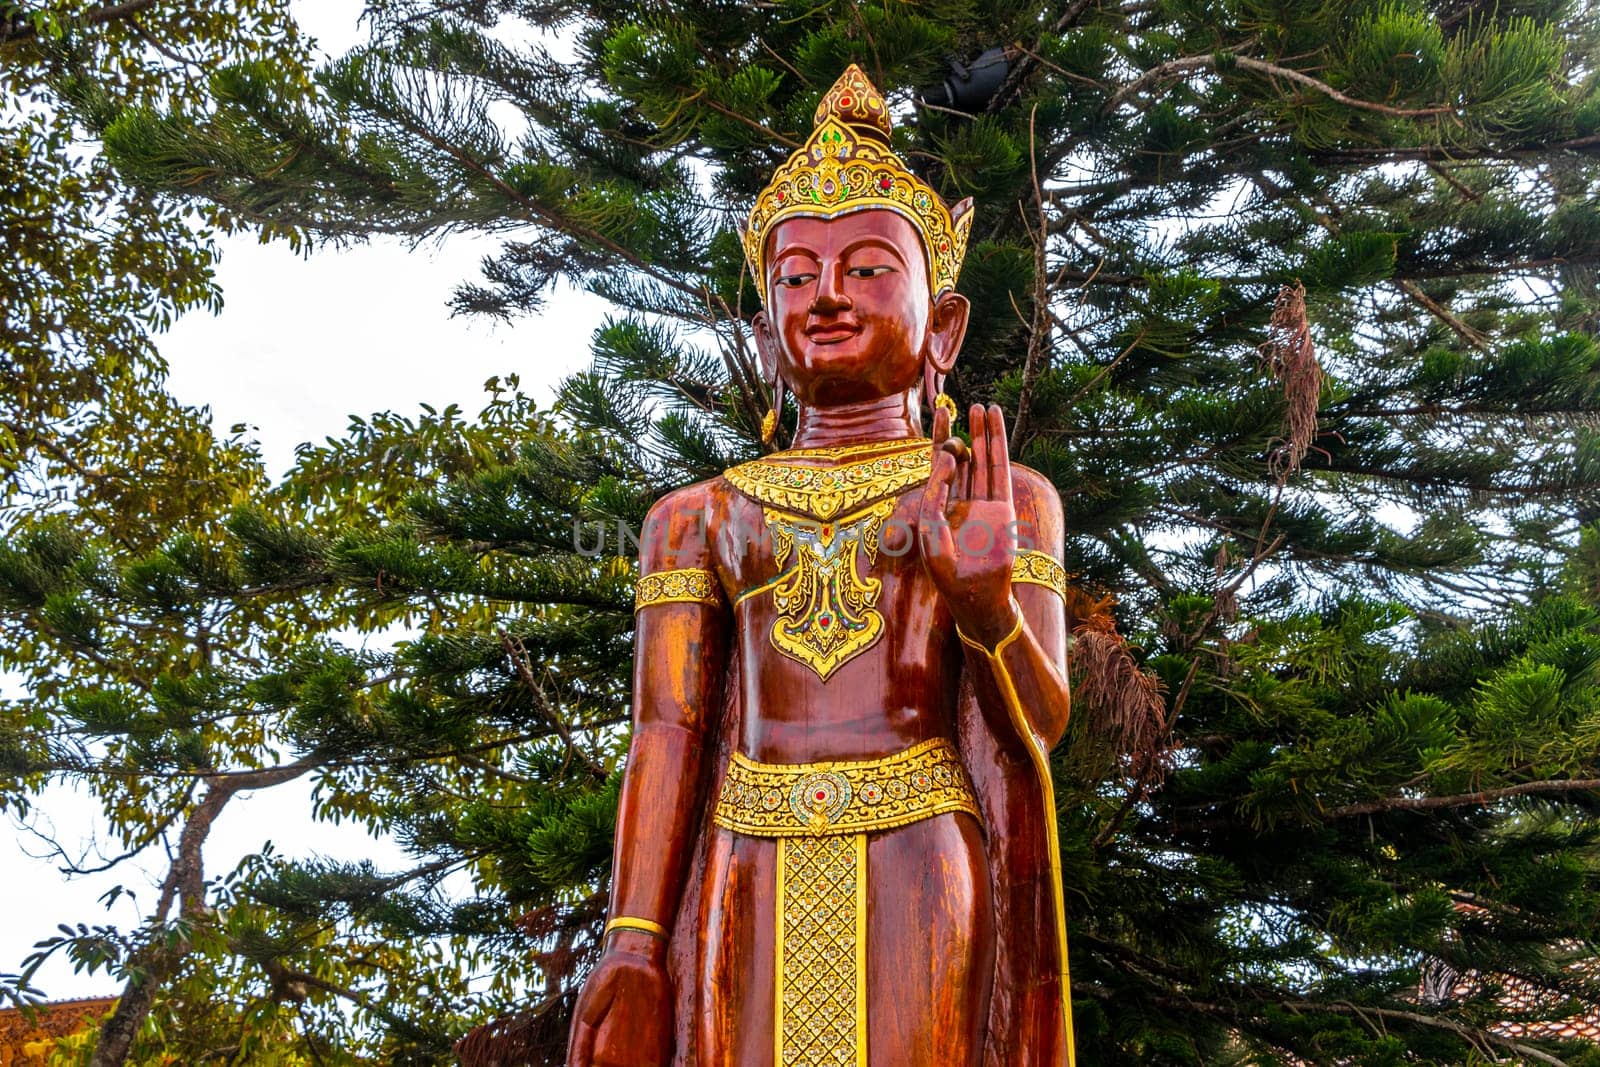 Buddha sculpture figure statue at golden gold Wat Phra That Doi Suthep temple temples building in Chiang Mai Amphoe Mueang Chiang Mai Thailand in Southeastasia Asia.